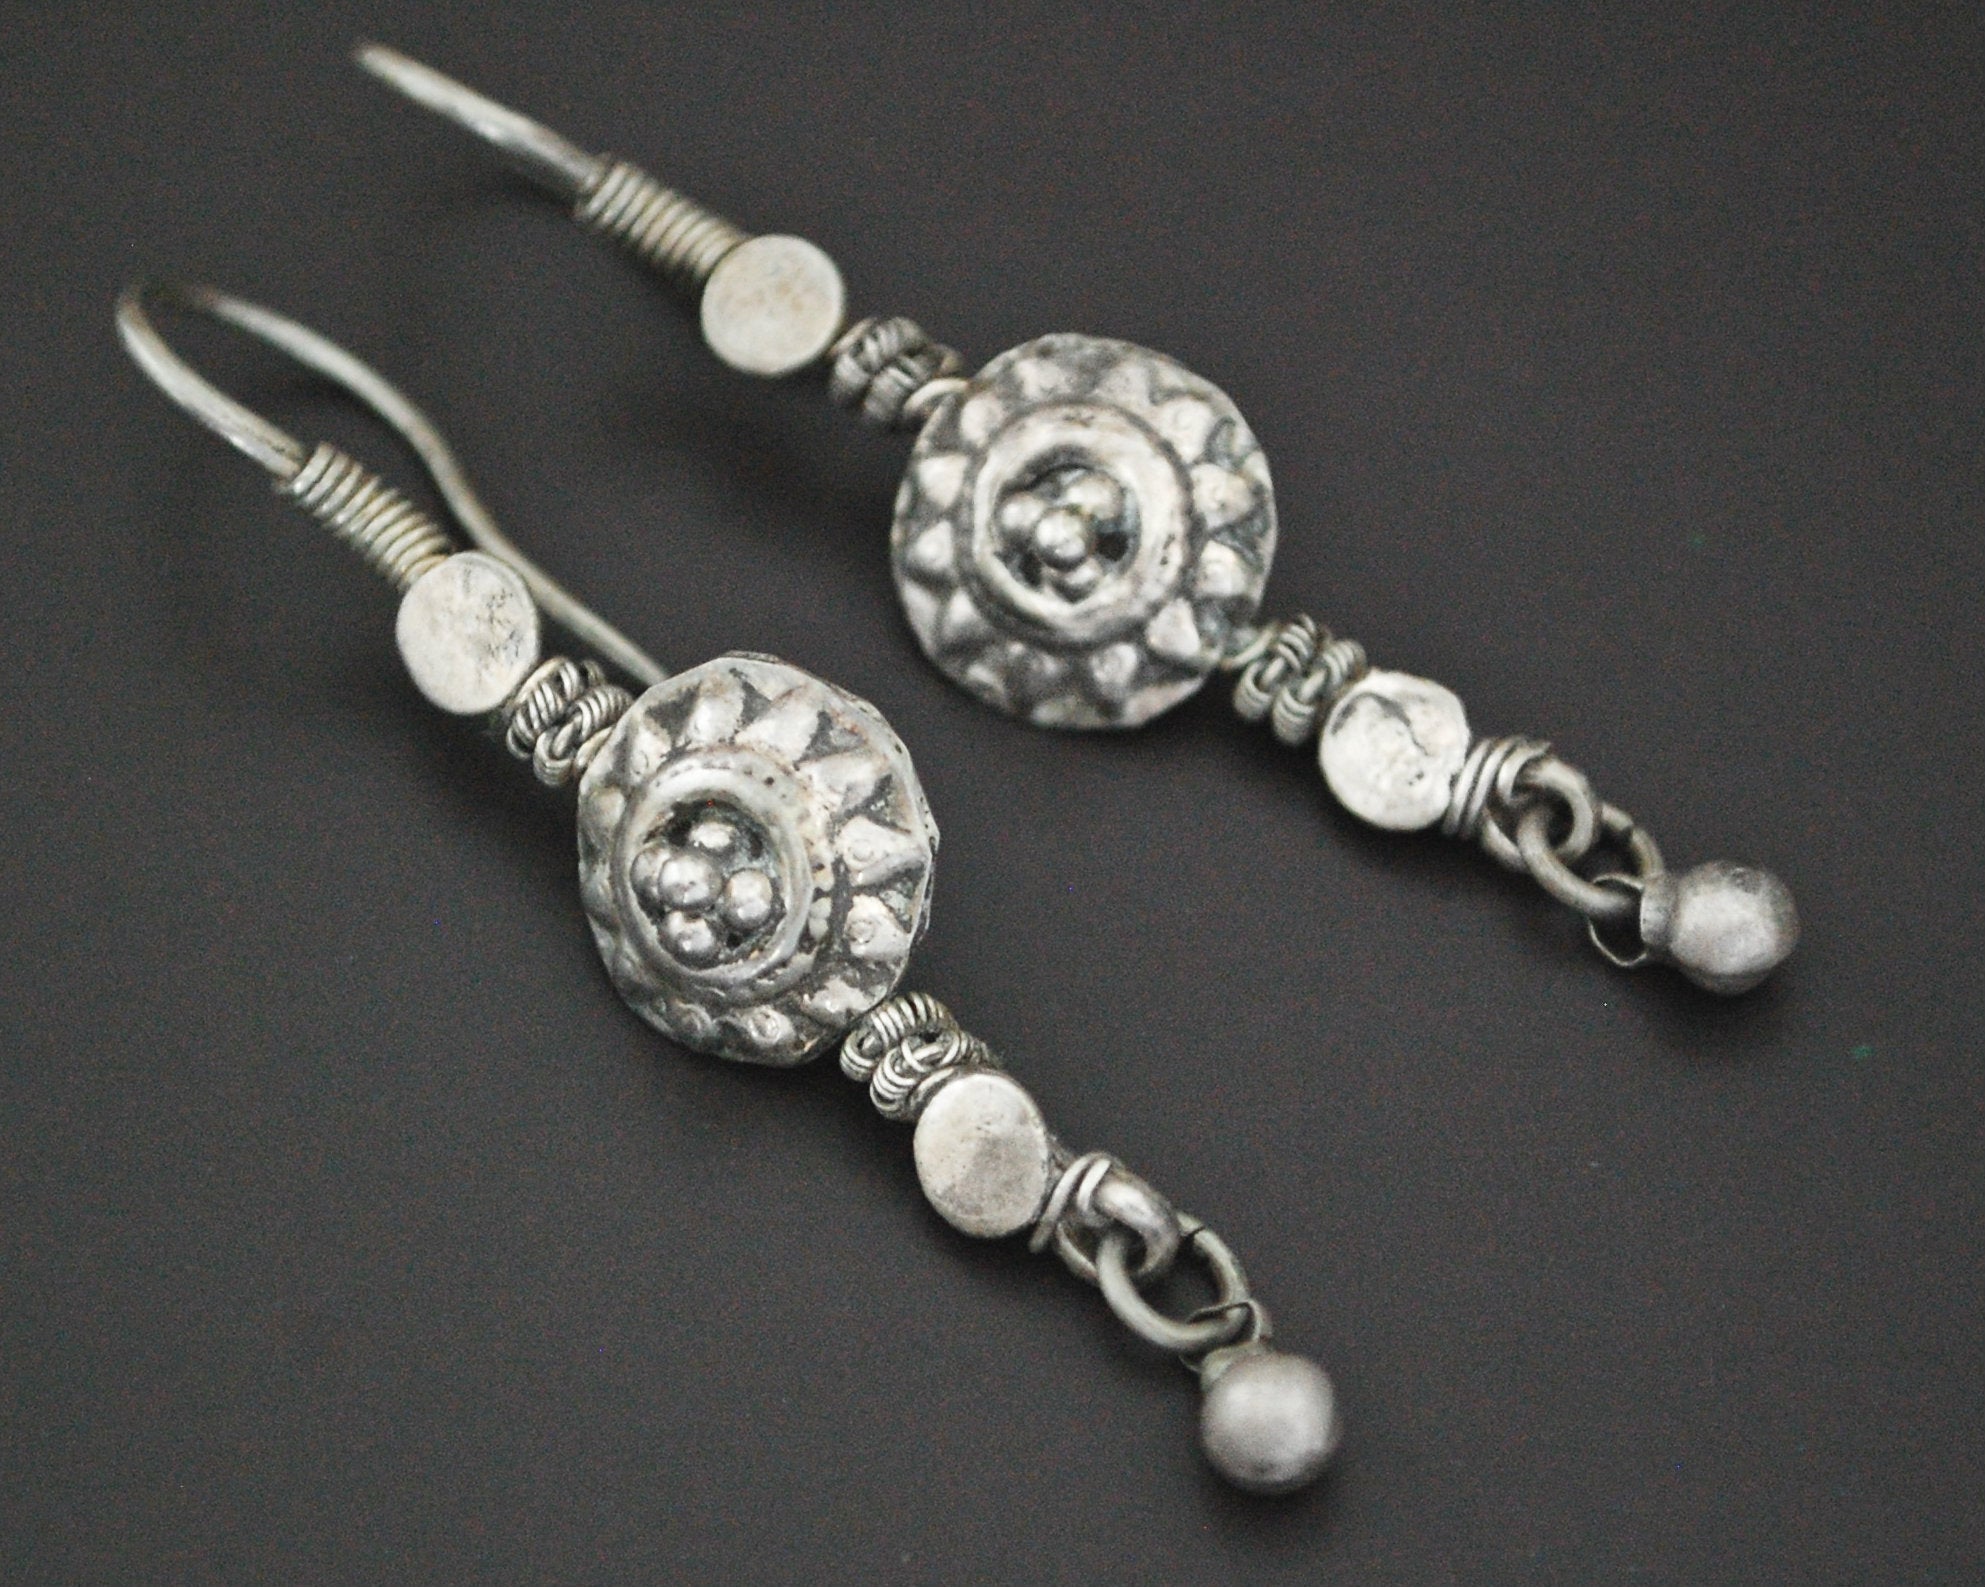 Afghani Earrings with Bell Decoration